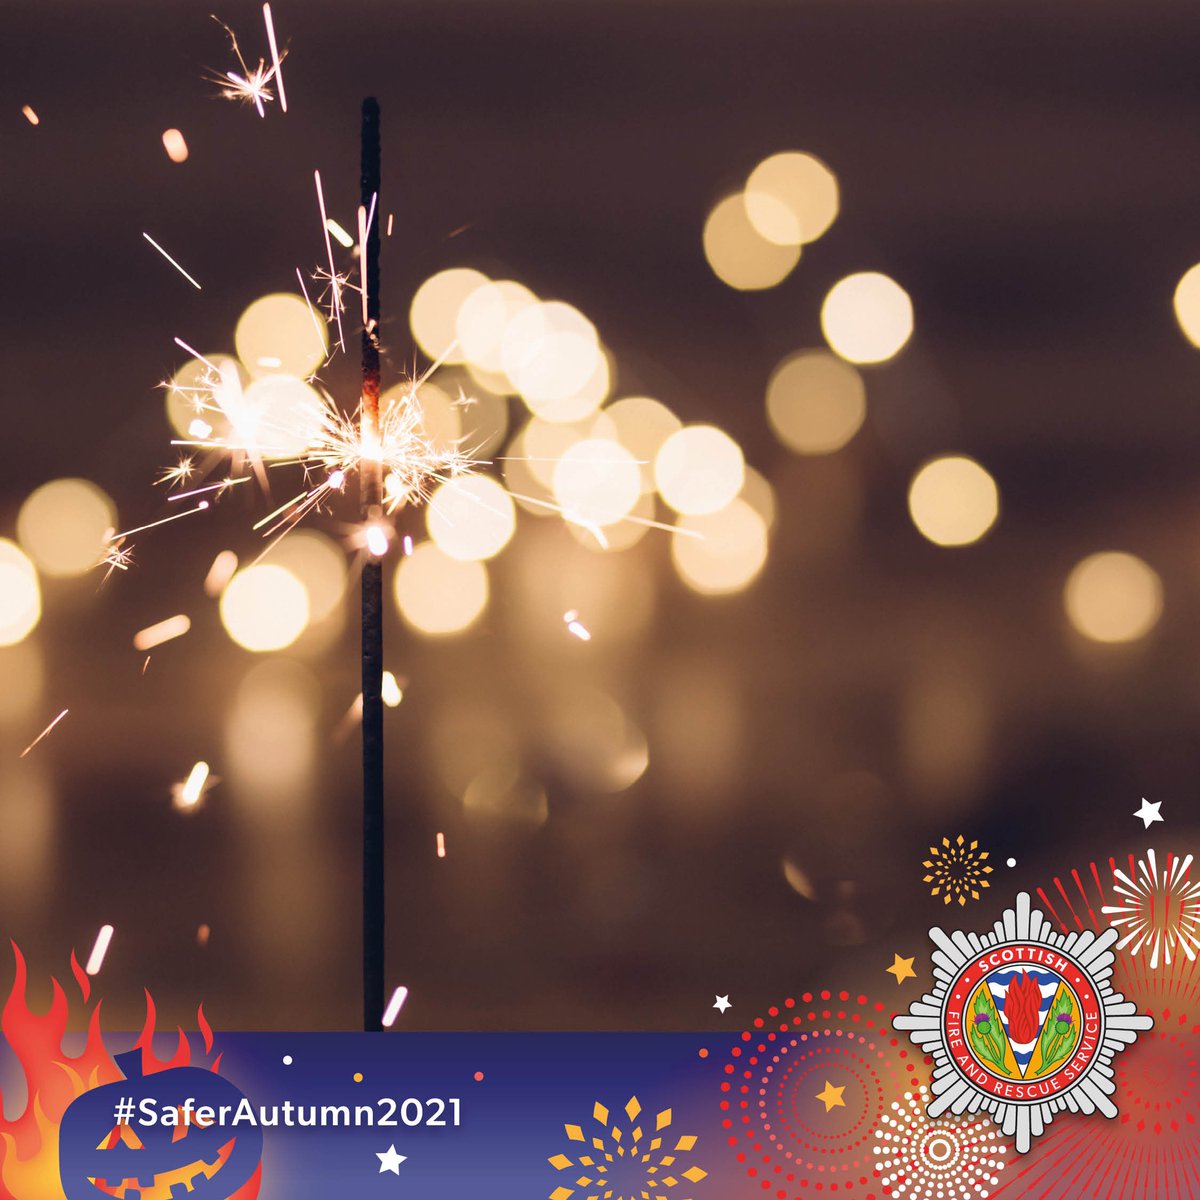 Planning on hosting a back-garden bonfire or using fireworks this year?
Please consider the risks. If things go wrong it can put pressure on our response to other emergencies.
The Fireworks Code helps reduce the risk of harm: firescotland.gov.uk/media/1144243/… 
#SaferAutumn2021